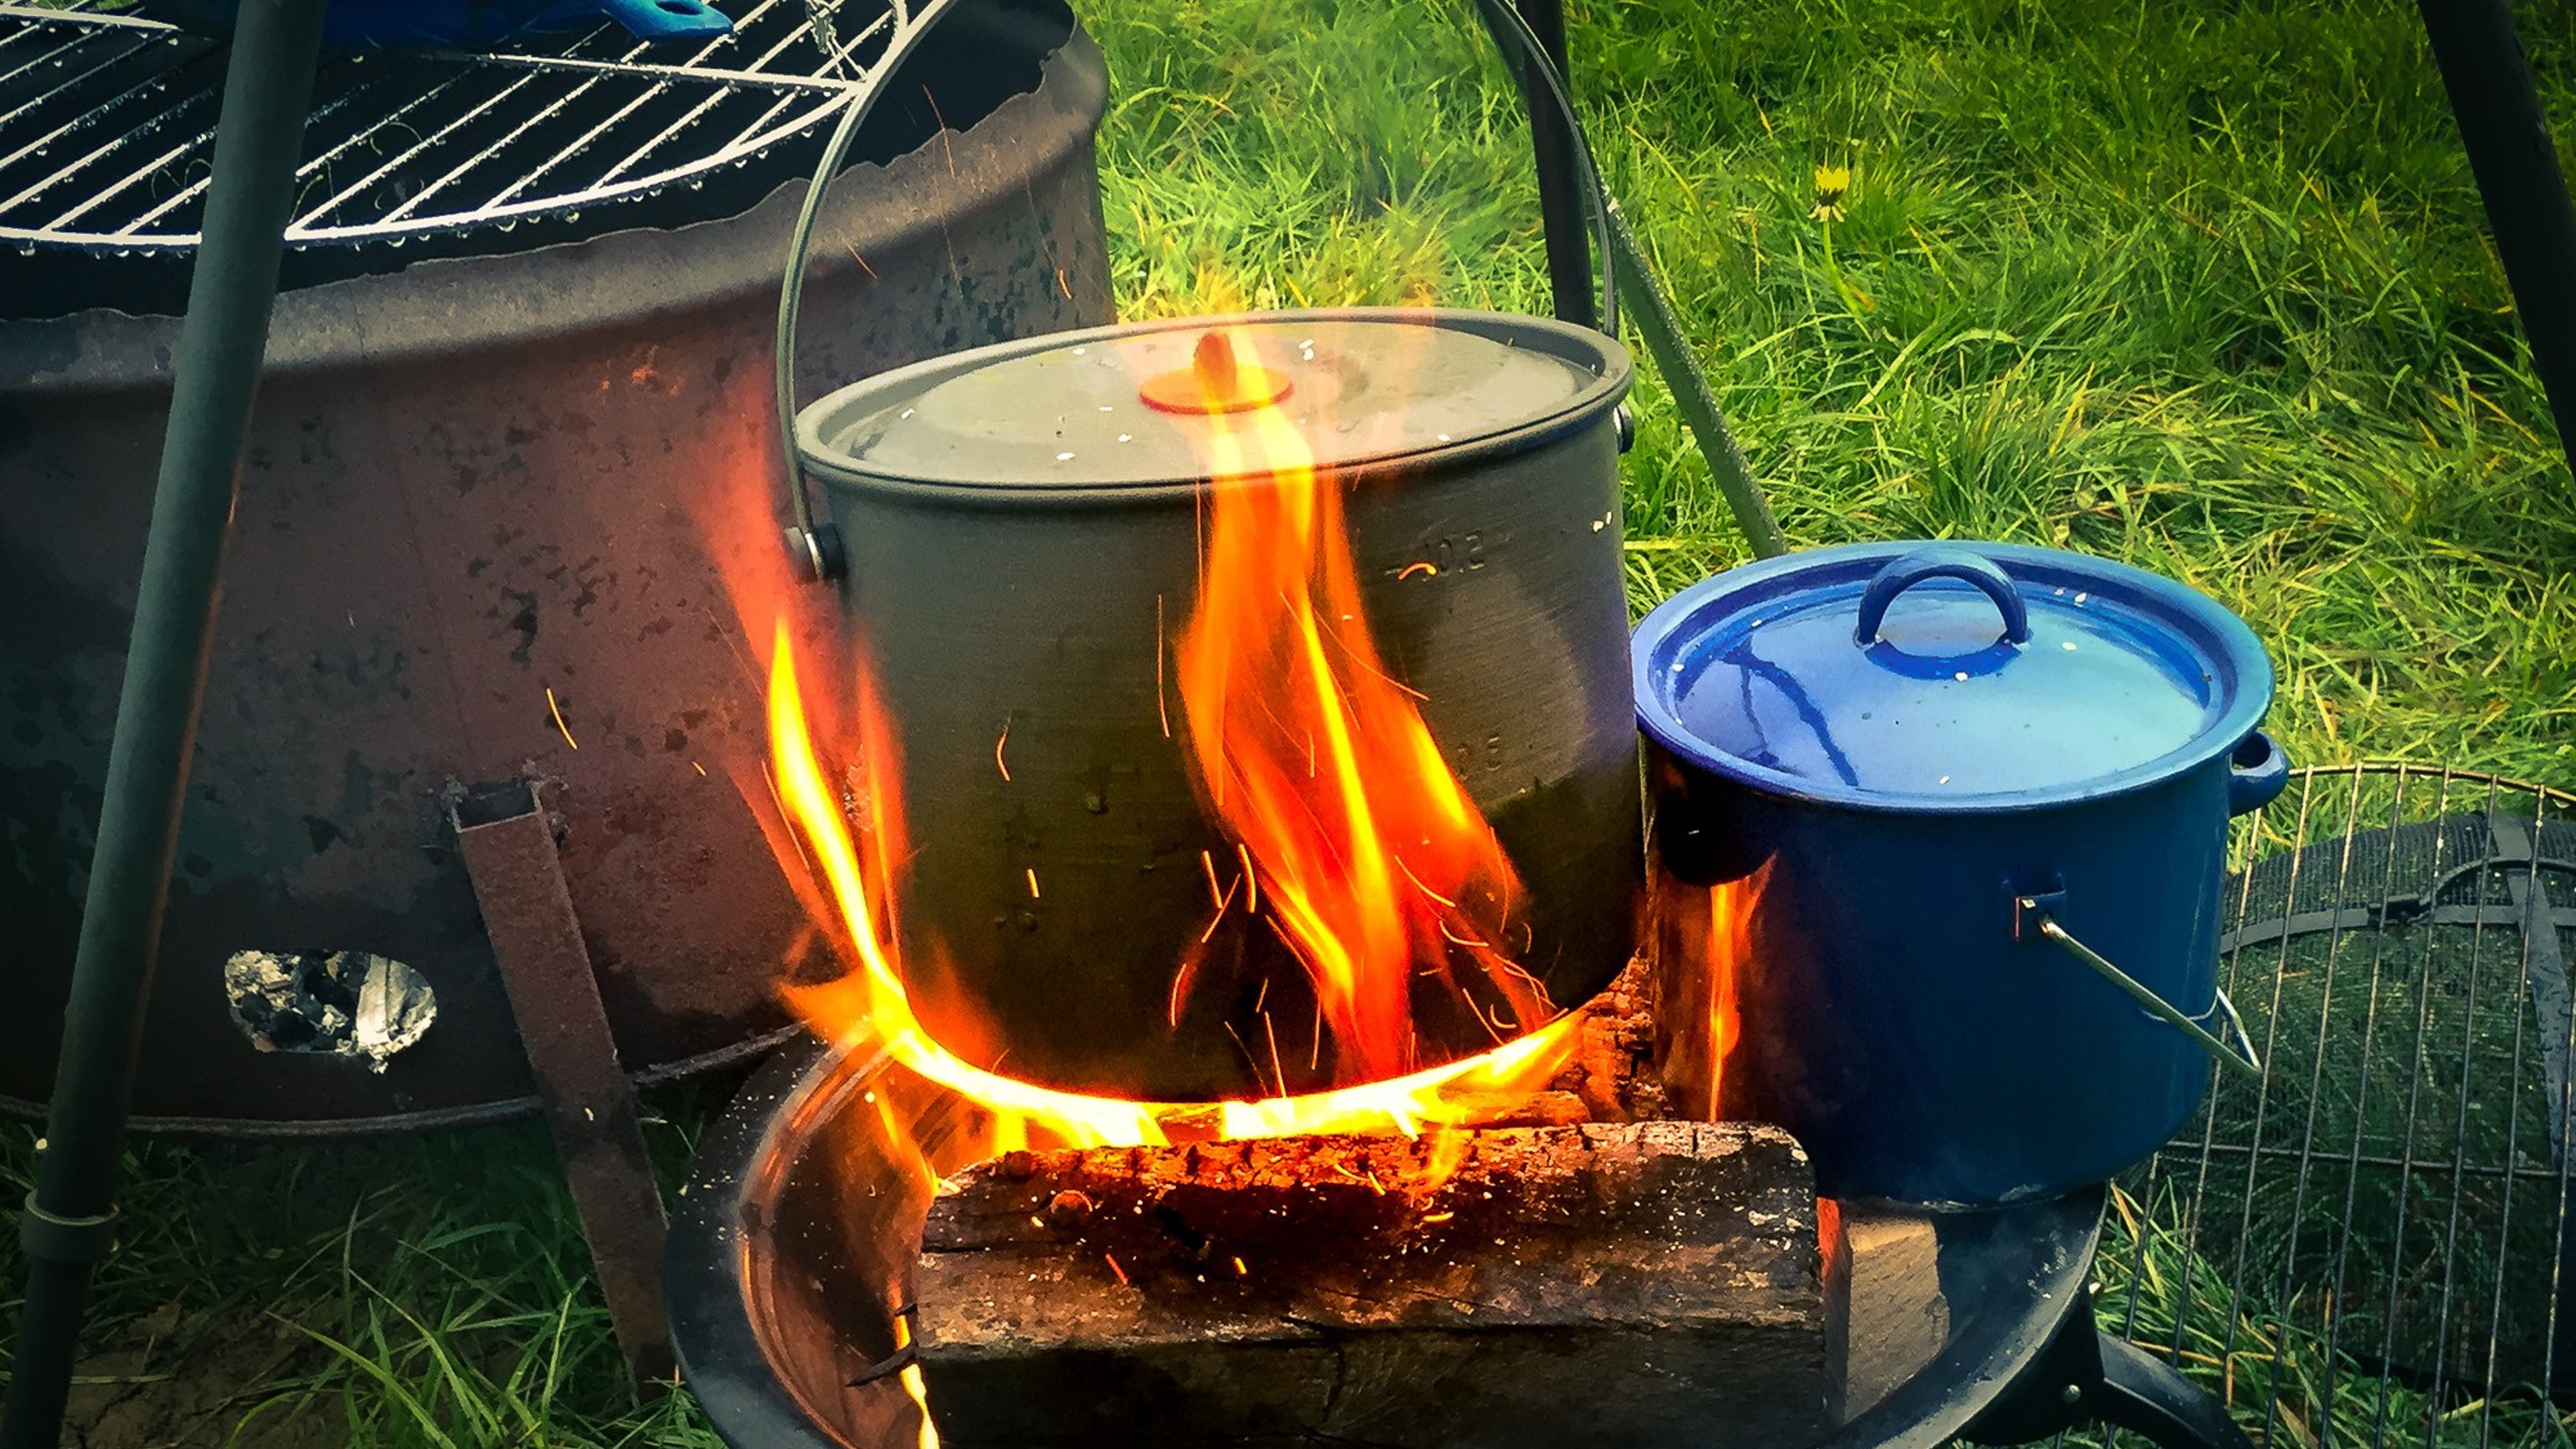 Pot cooking over the campfire